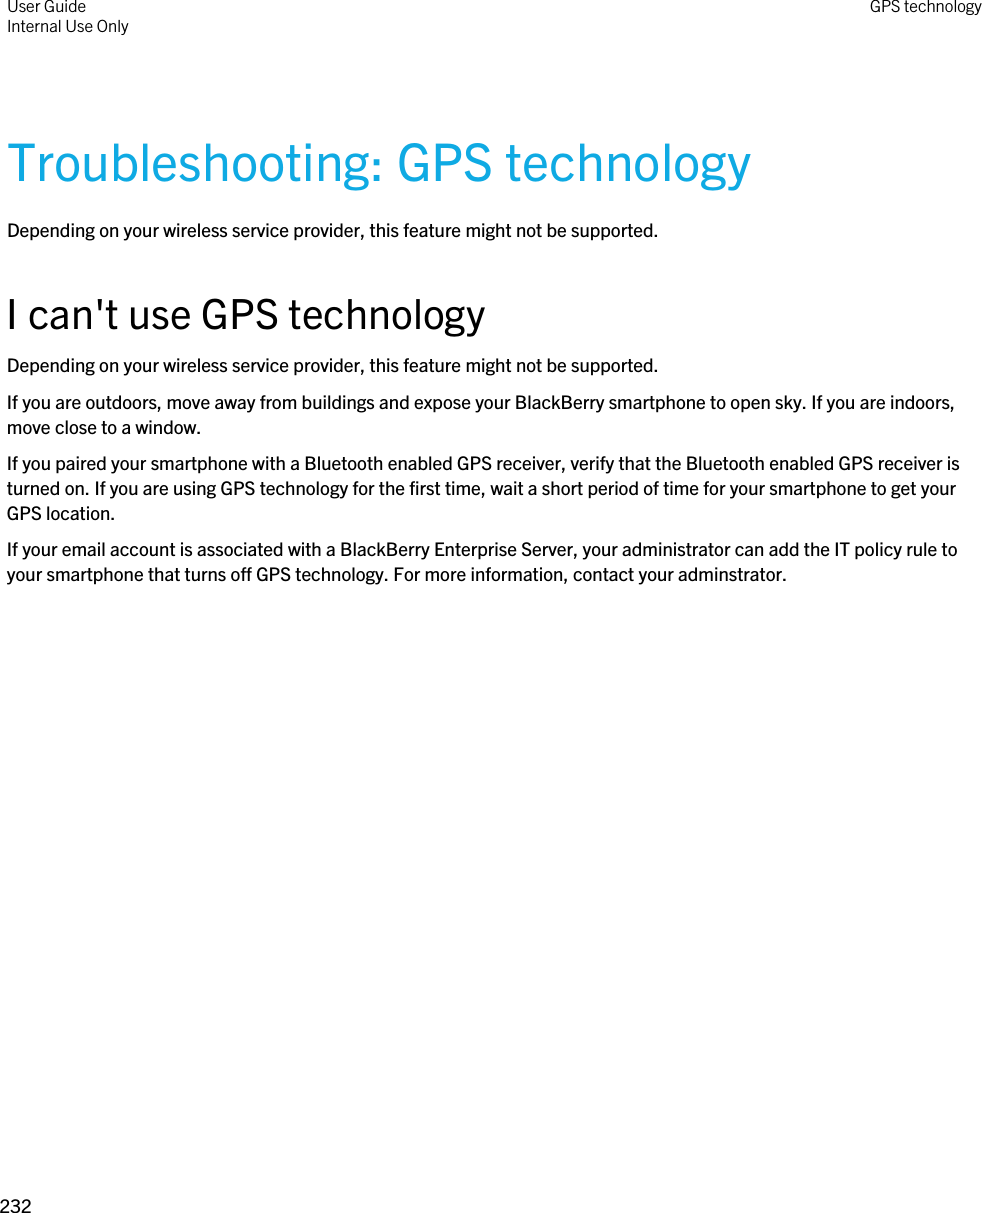 Troubleshooting: GPS technologyDepending on your wireless service provider, this feature might not be supported. I can&apos;t use GPS technologyDepending on your wireless service provider, this feature might not be supported. If you are outdoors, move away from buildings and expose your BlackBerry smartphone to open sky. If you are indoors, move close to a window.If you paired your smartphone with a Bluetooth enabled GPS receiver, verify that the Bluetooth enabled GPS receiver is turned on. If you are using GPS technology for the first time, wait a short period of time for your smartphone to get your GPS location.If your email account is associated with a BlackBerry Enterprise Server, your administrator can add the IT policy rule to your smartphone that turns off GPS technology. For more information, contact your adminstrator.User GuideInternal Use Only GPS technology232 